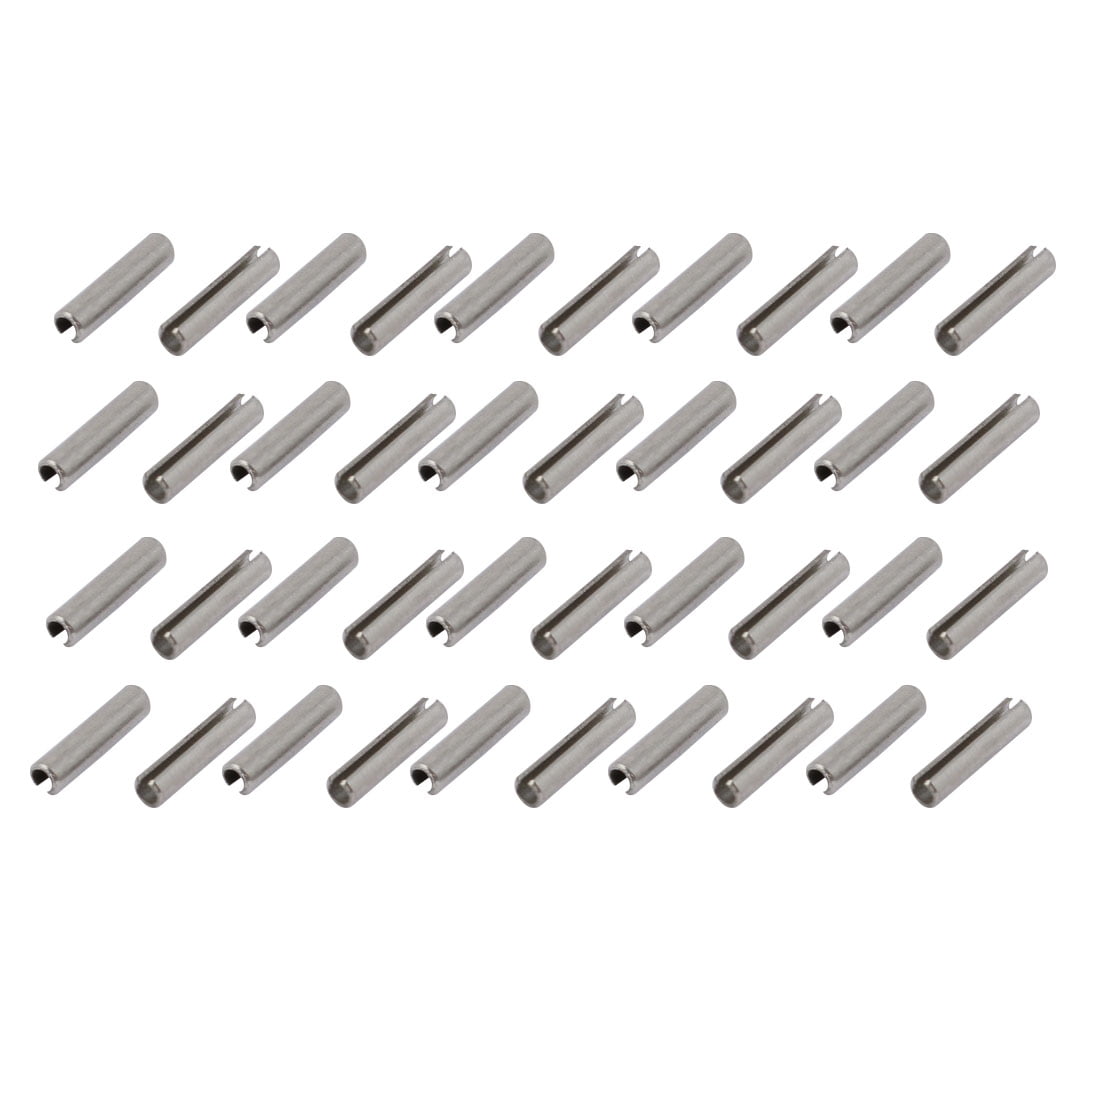 Details about   M1.5x18mm 304 Stainless Steel Split Spring Dowel Tension Roll Pin 40pcs 